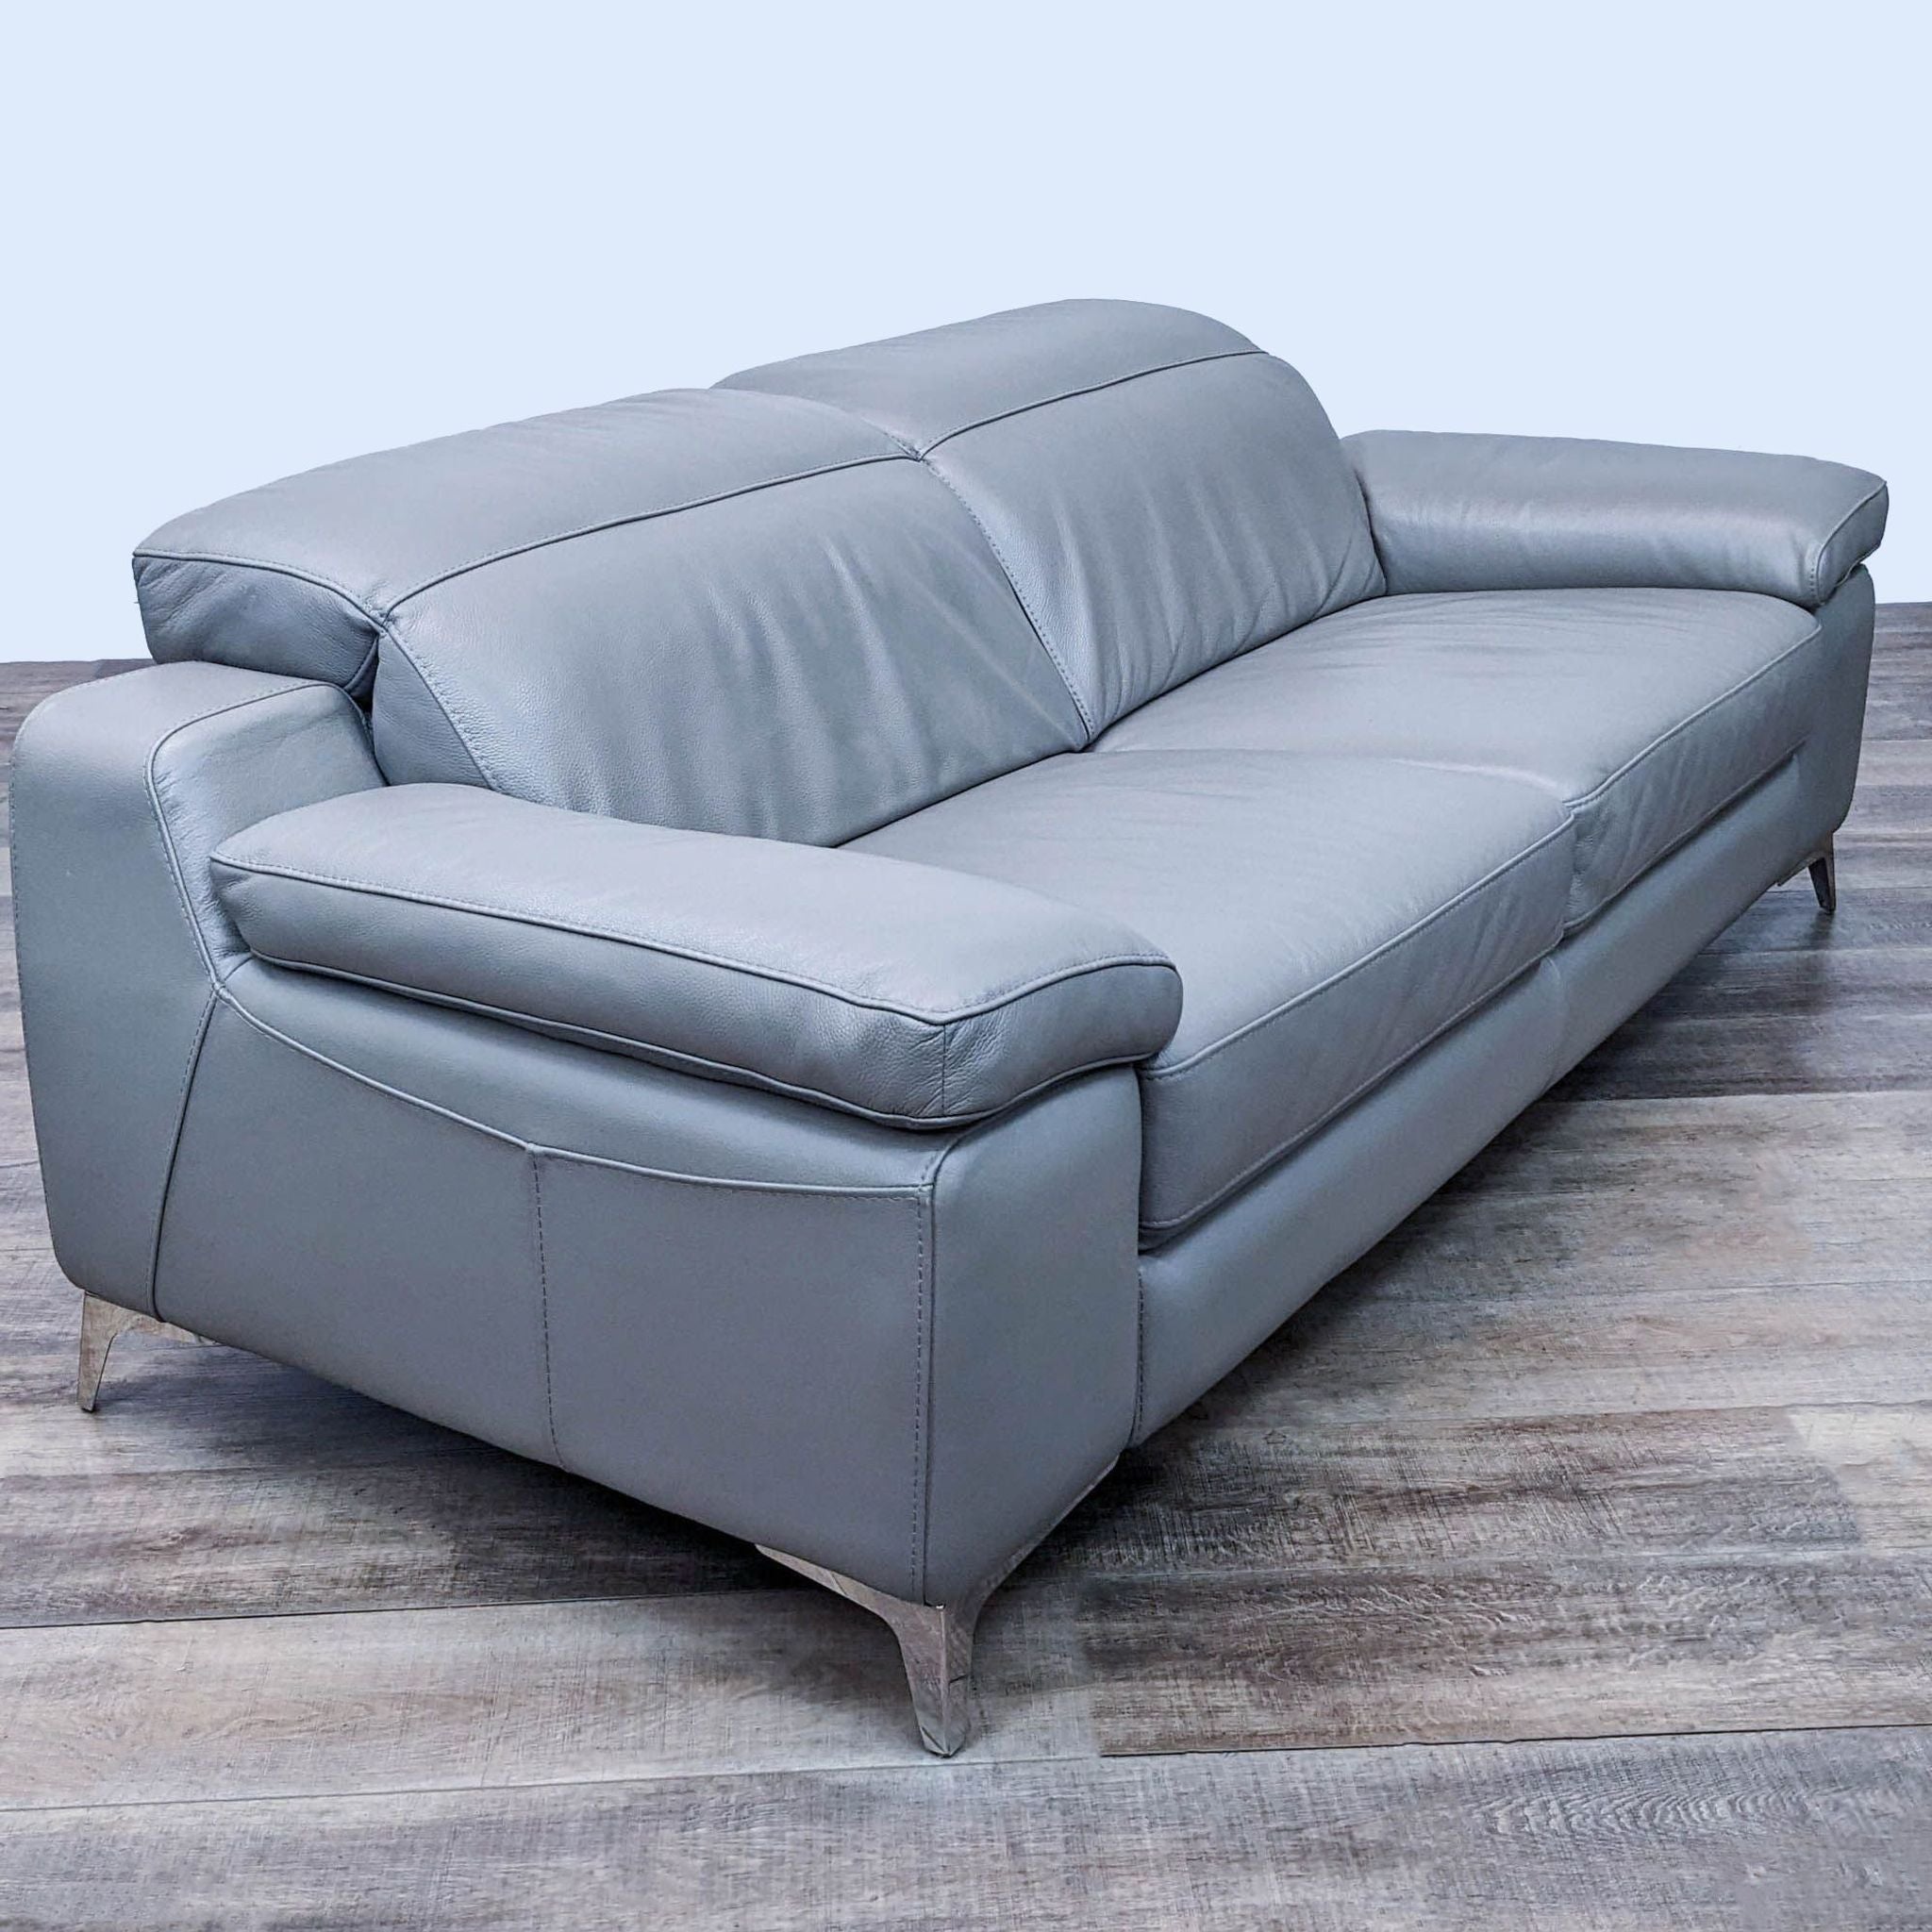 2. Modern Reperch 3-seater couch featuring adjustable backrest, plush armrests, and stylish chrome legs, partially reclined on laminate flooring.